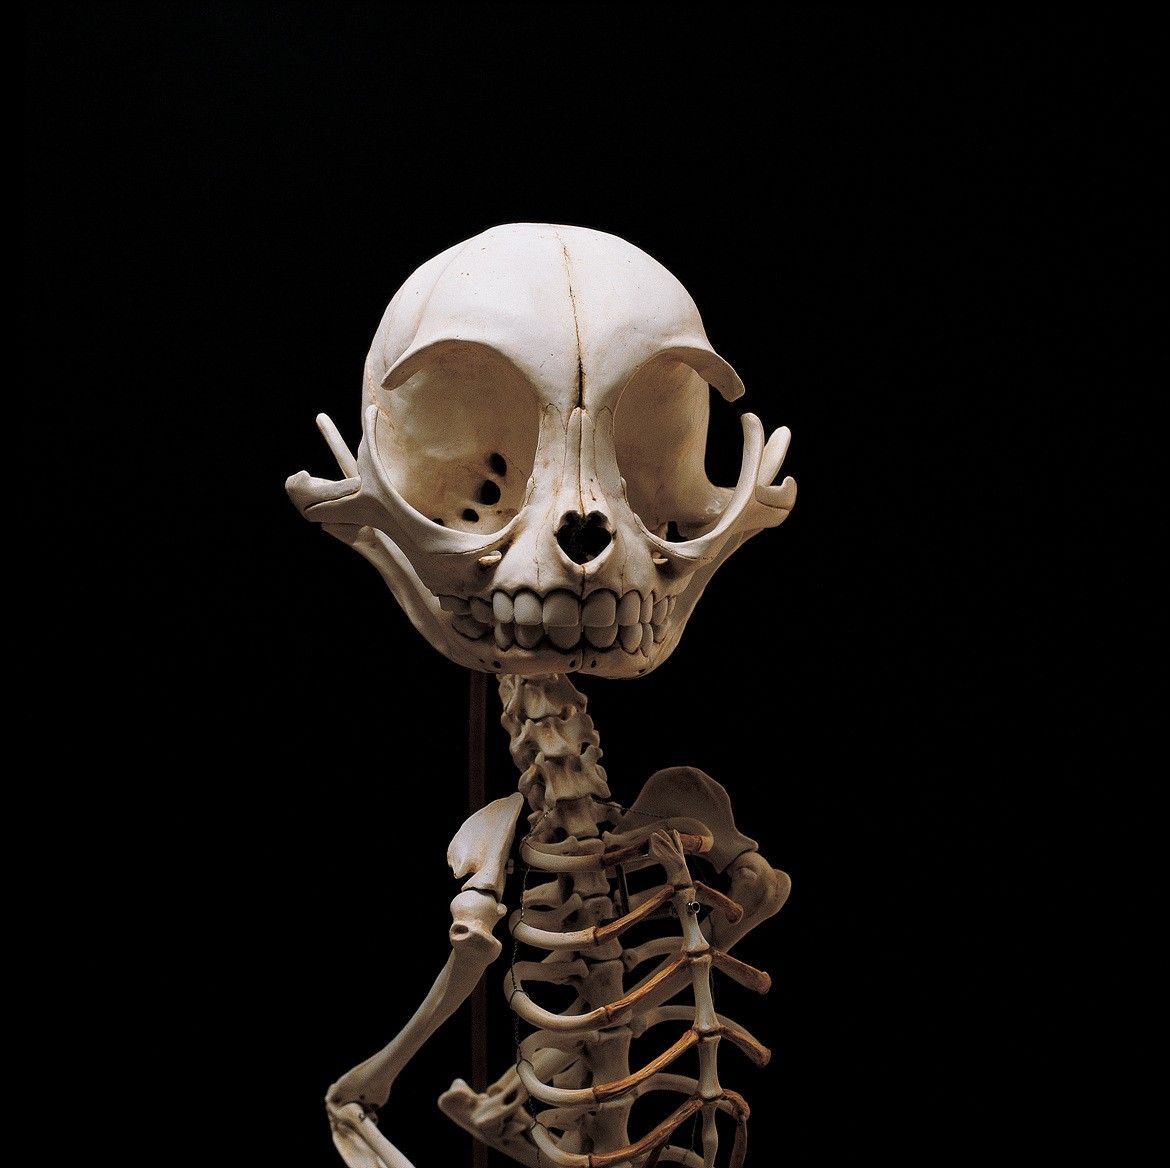 This Is What The Skeletons Of Famous Cartoon Characters